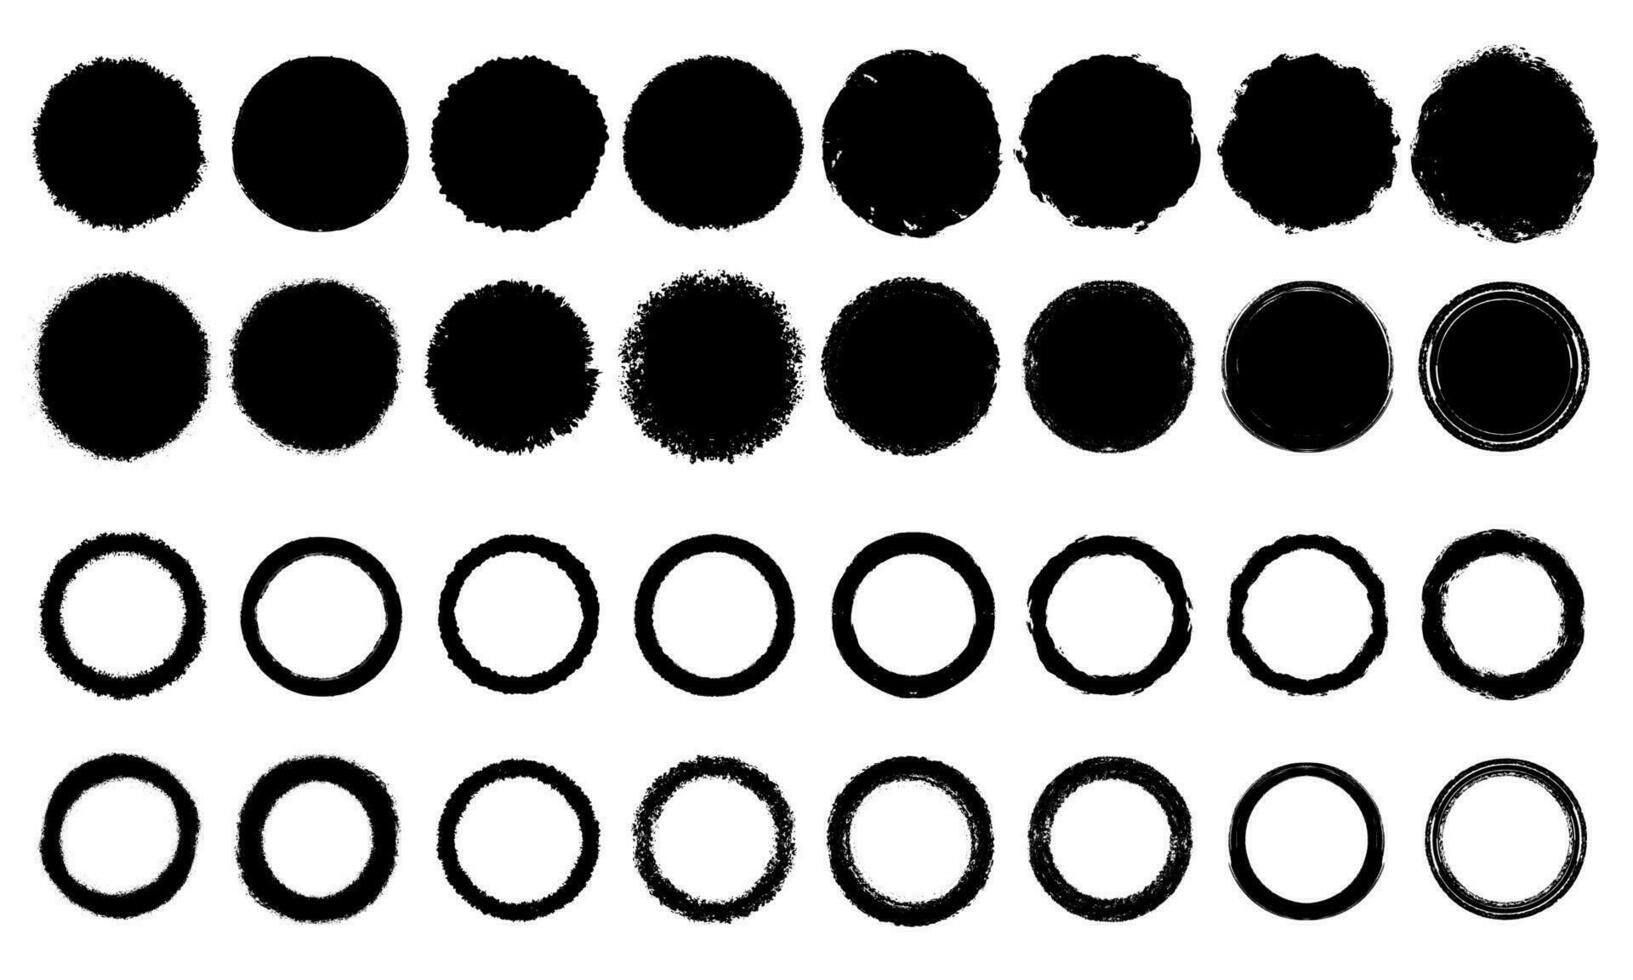 Grunge circles set, Grunge round shapes collection vector